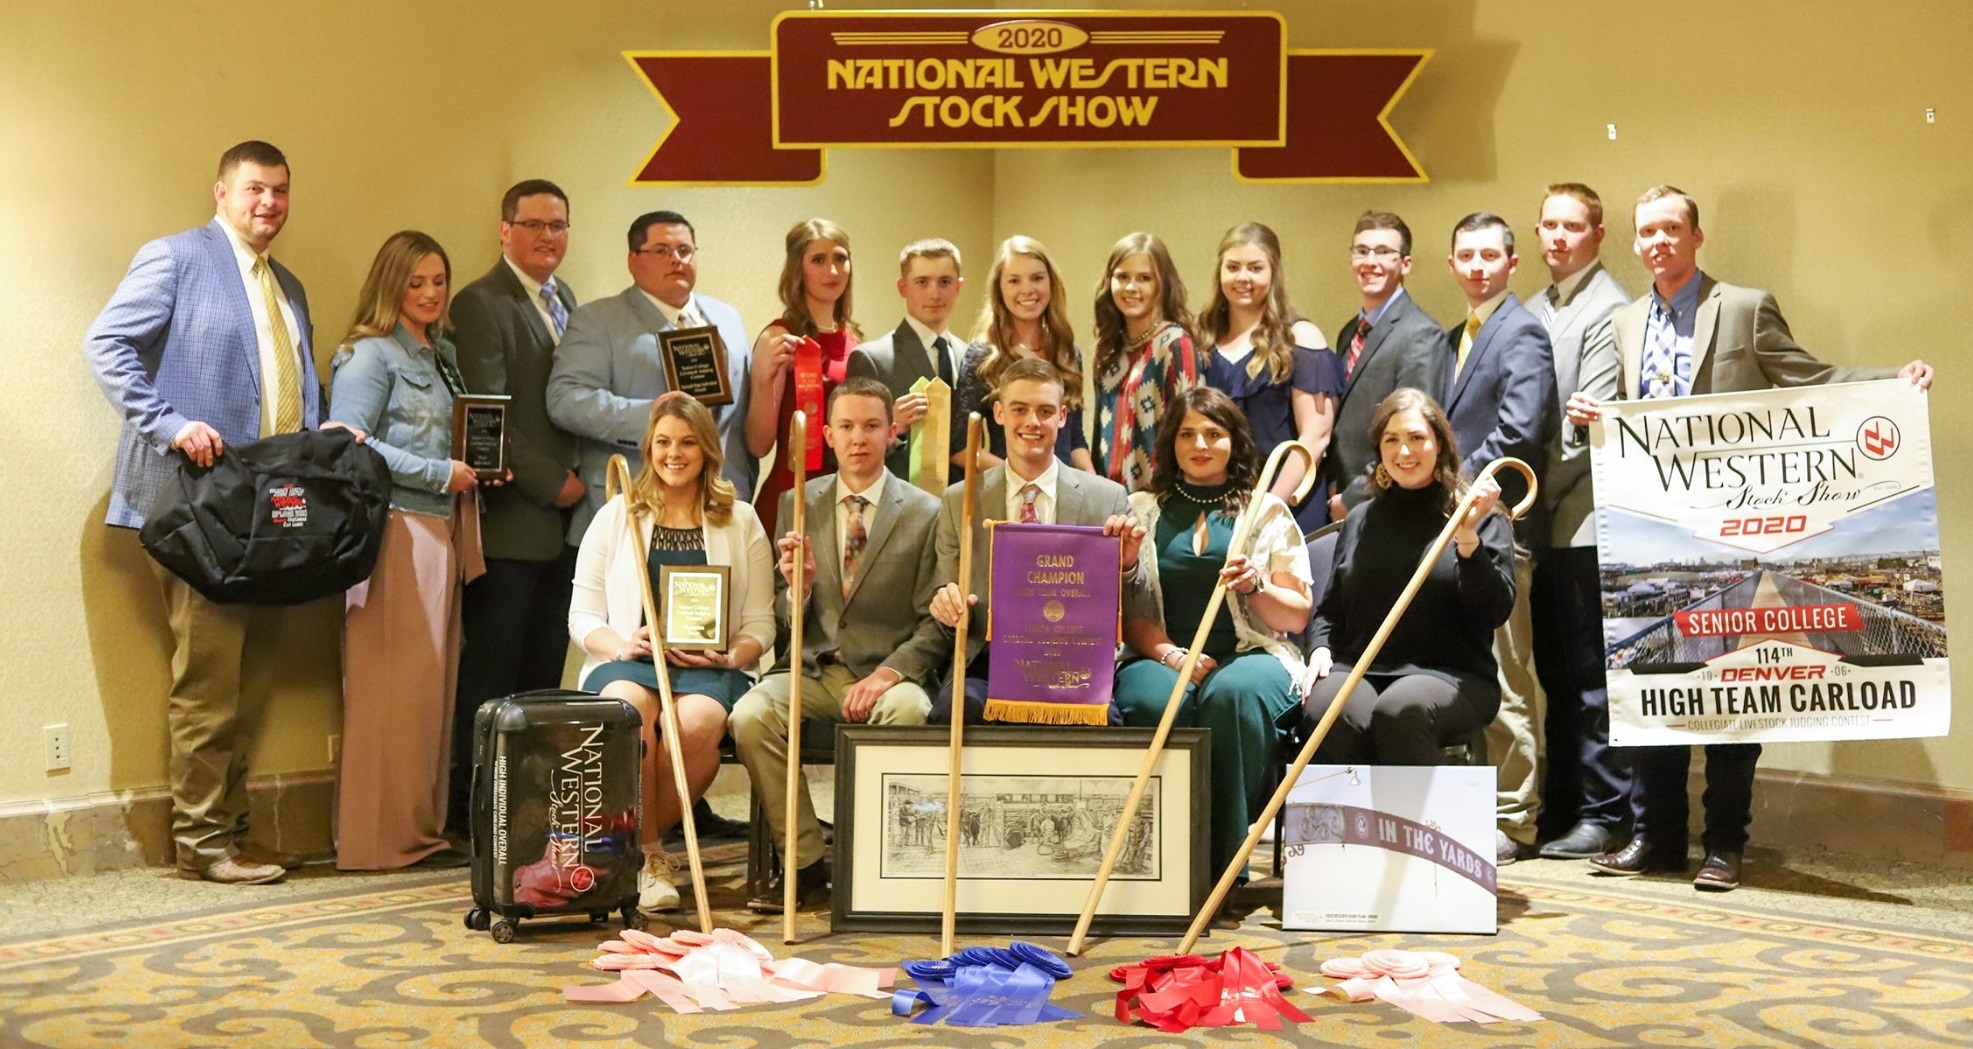 The 2020 University of Wyoming Livestock Judging Team at the National Western Stock Show.